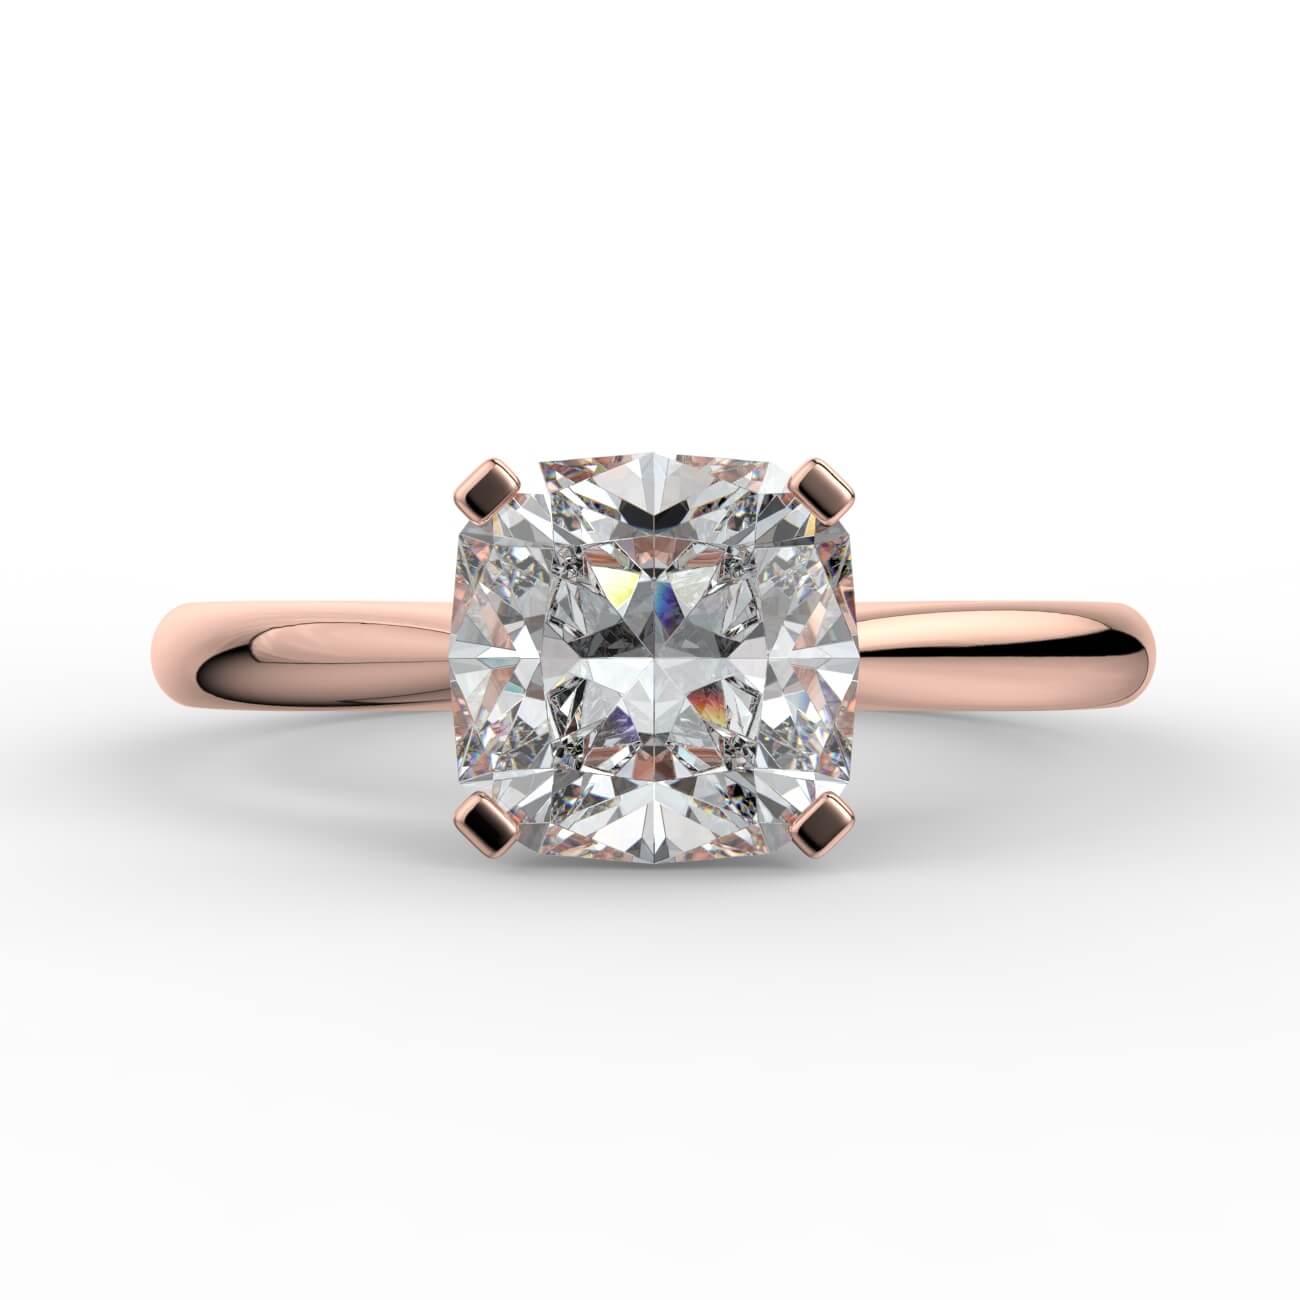 Cushion cut diamond cathedral engagement ring in rose gold – Australian Diamond Network